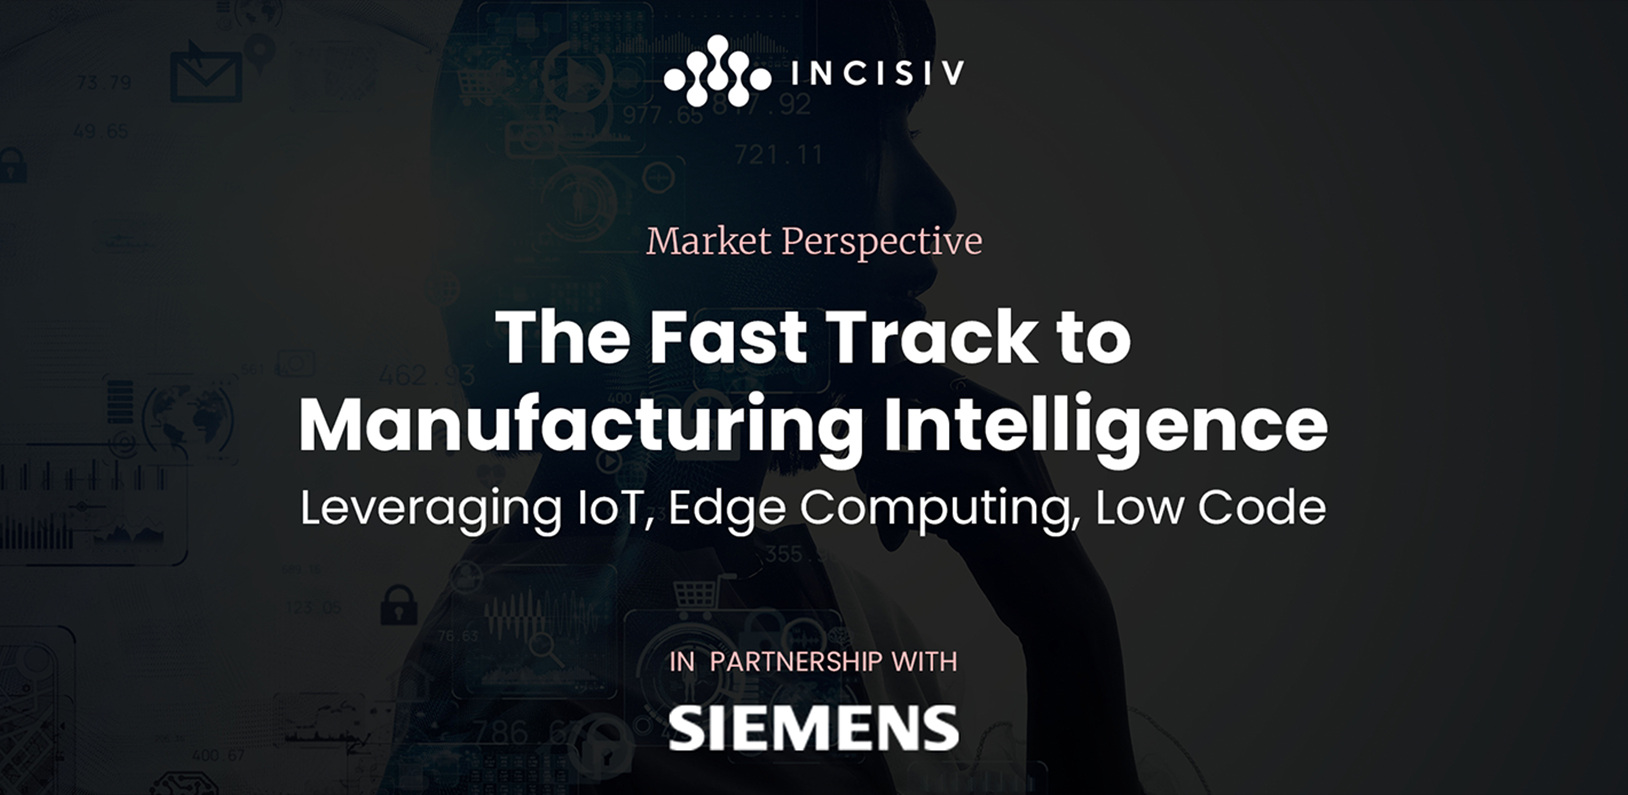 The Fast Track to Manufacturing Intelligence